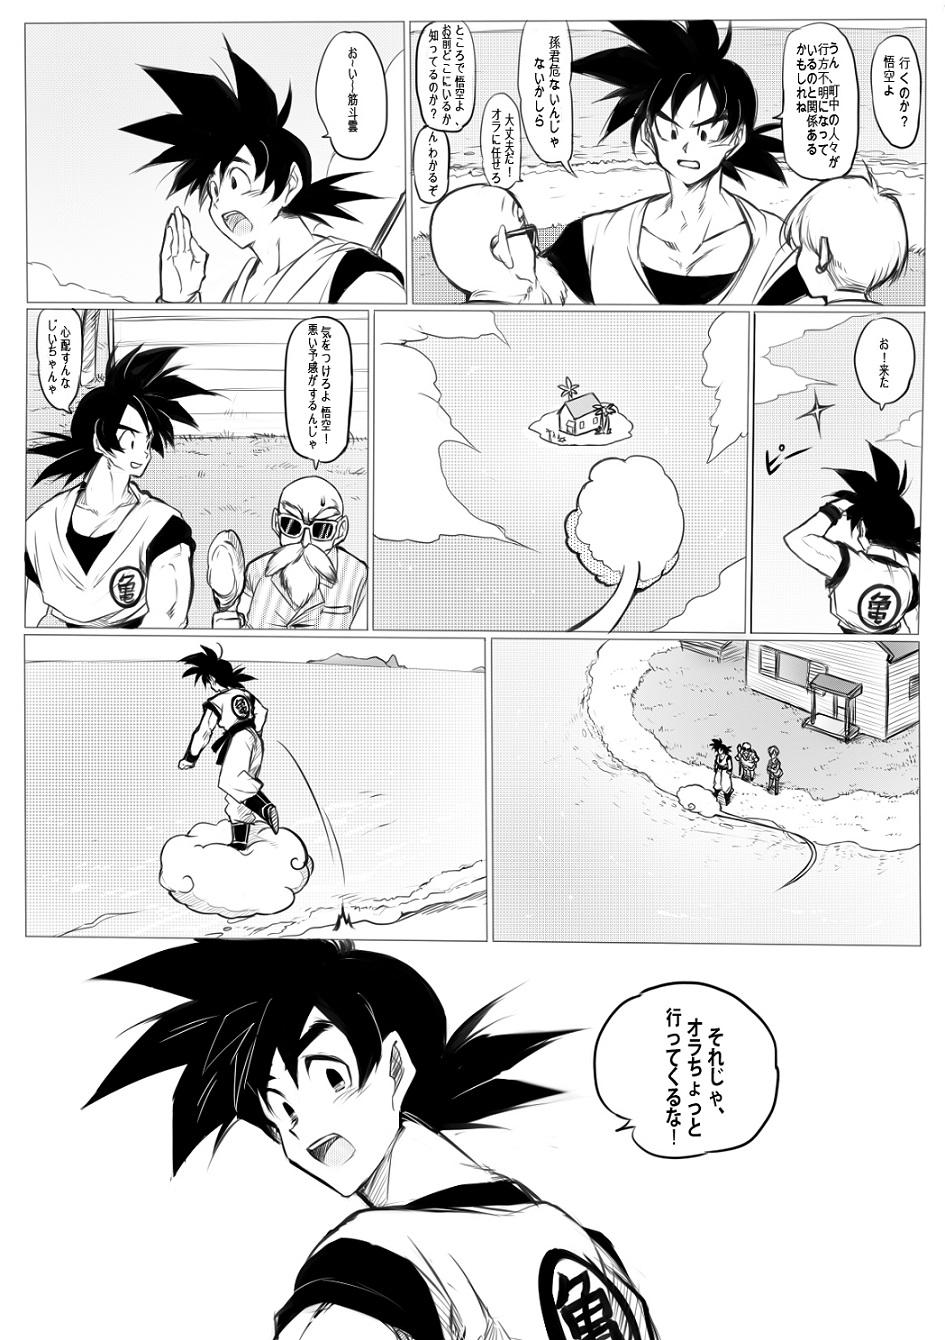 One 接触 - Dragon ball z Shemales - Page 2